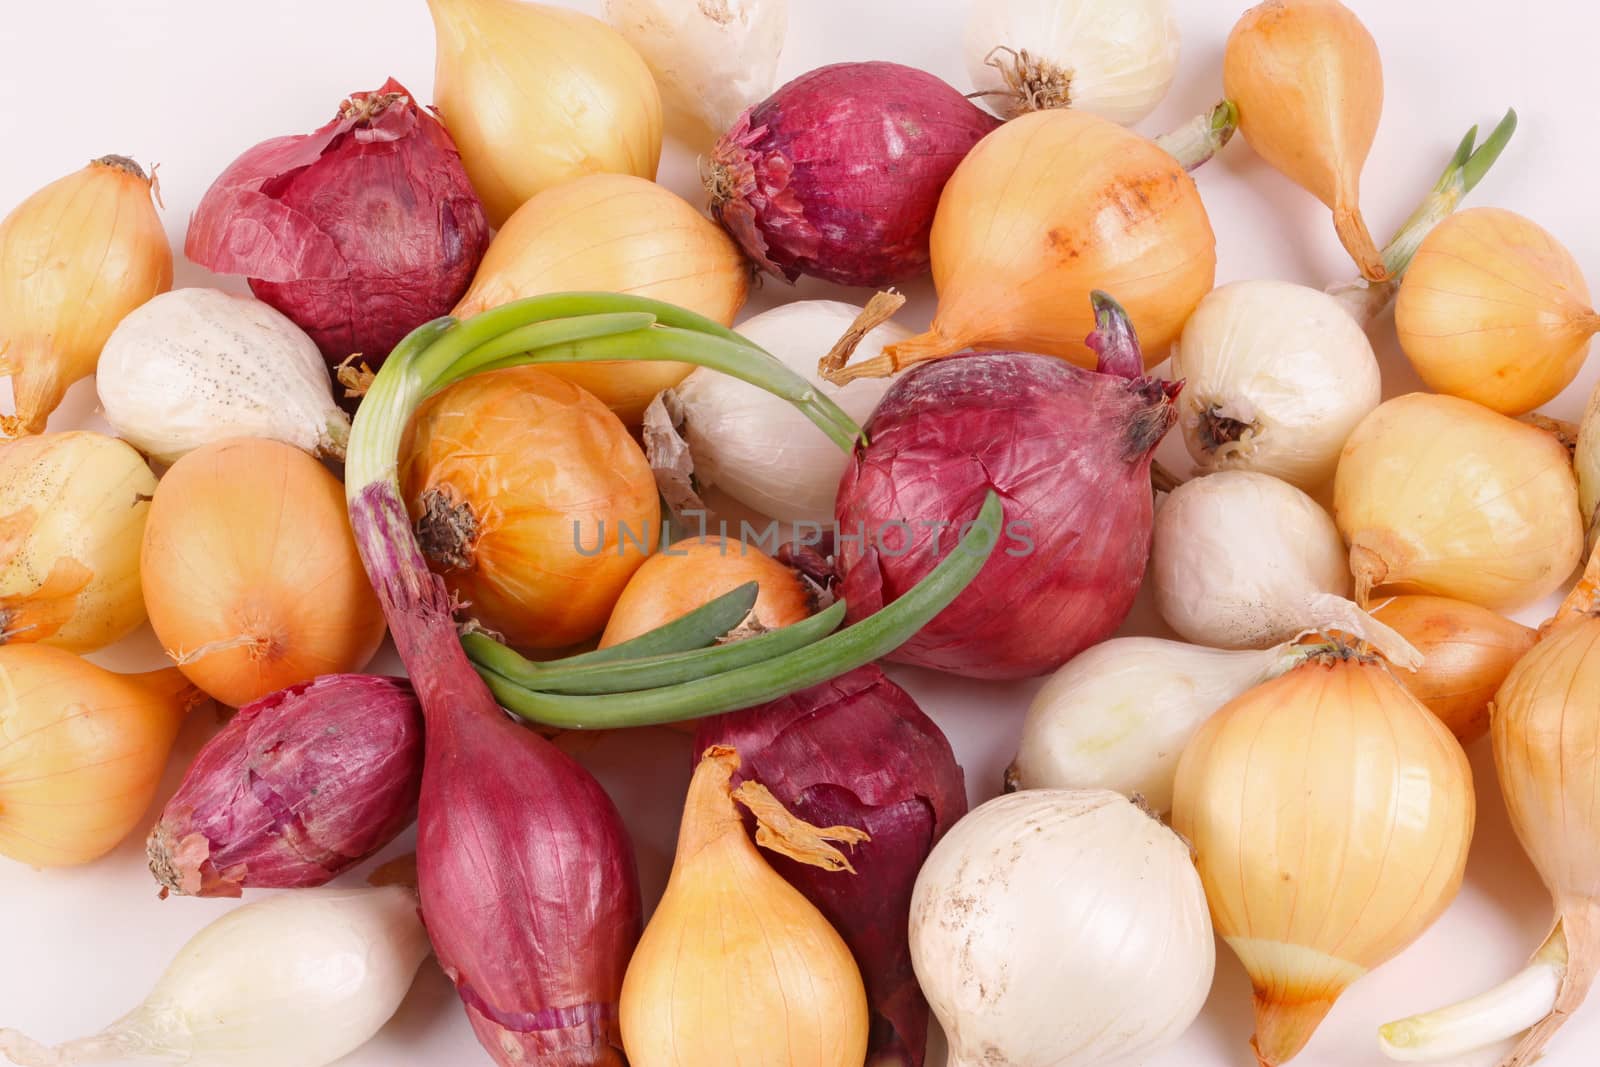 Small bulbs of red, white and yellow onions (Allium cepa) ready to be planted as sets or used for cooking